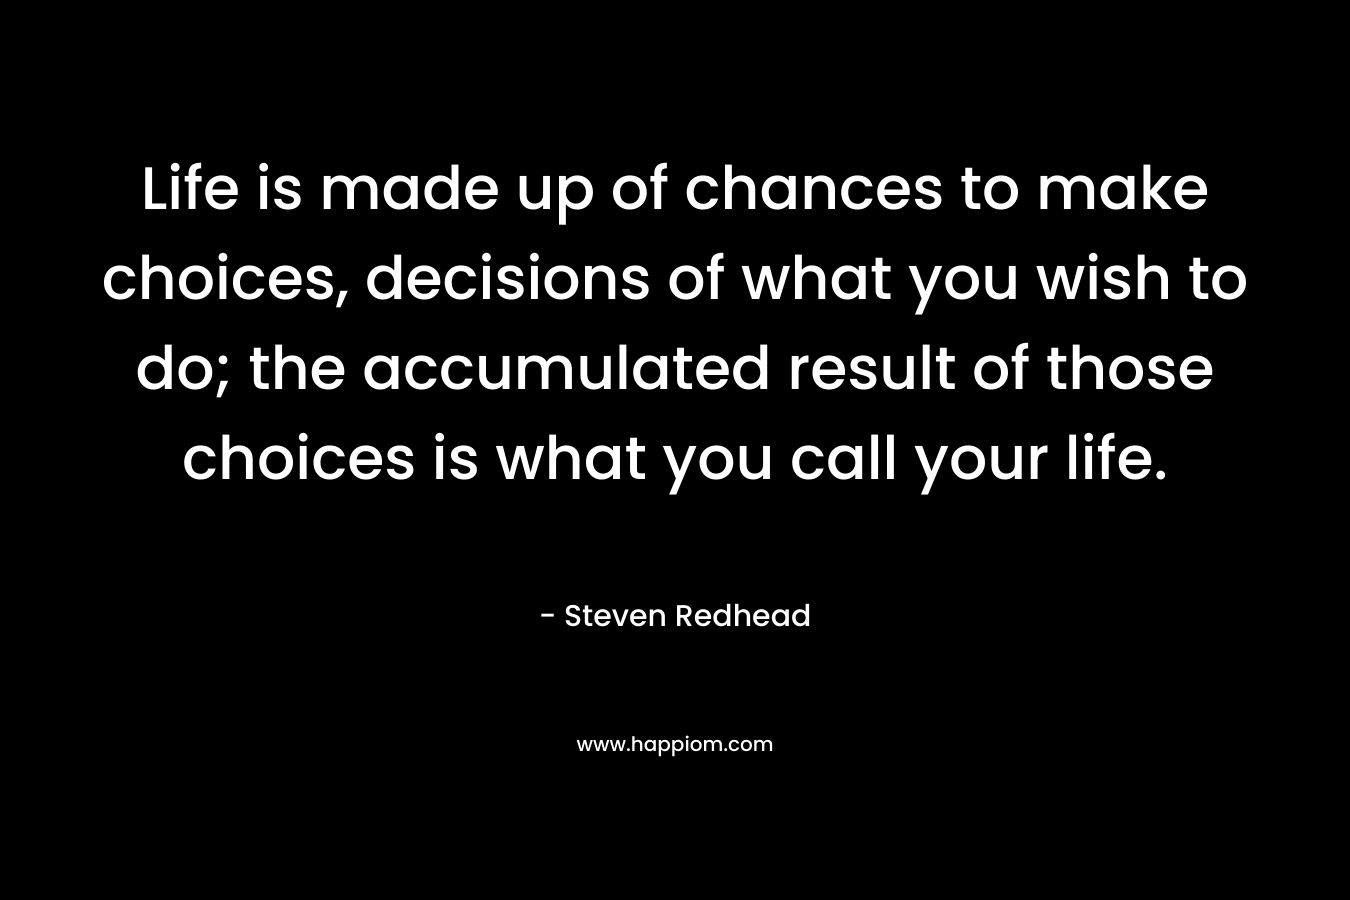 Life is made up of chances to make choices, decisions of what you wish to do; the accumulated result of those choices is what you call your life.